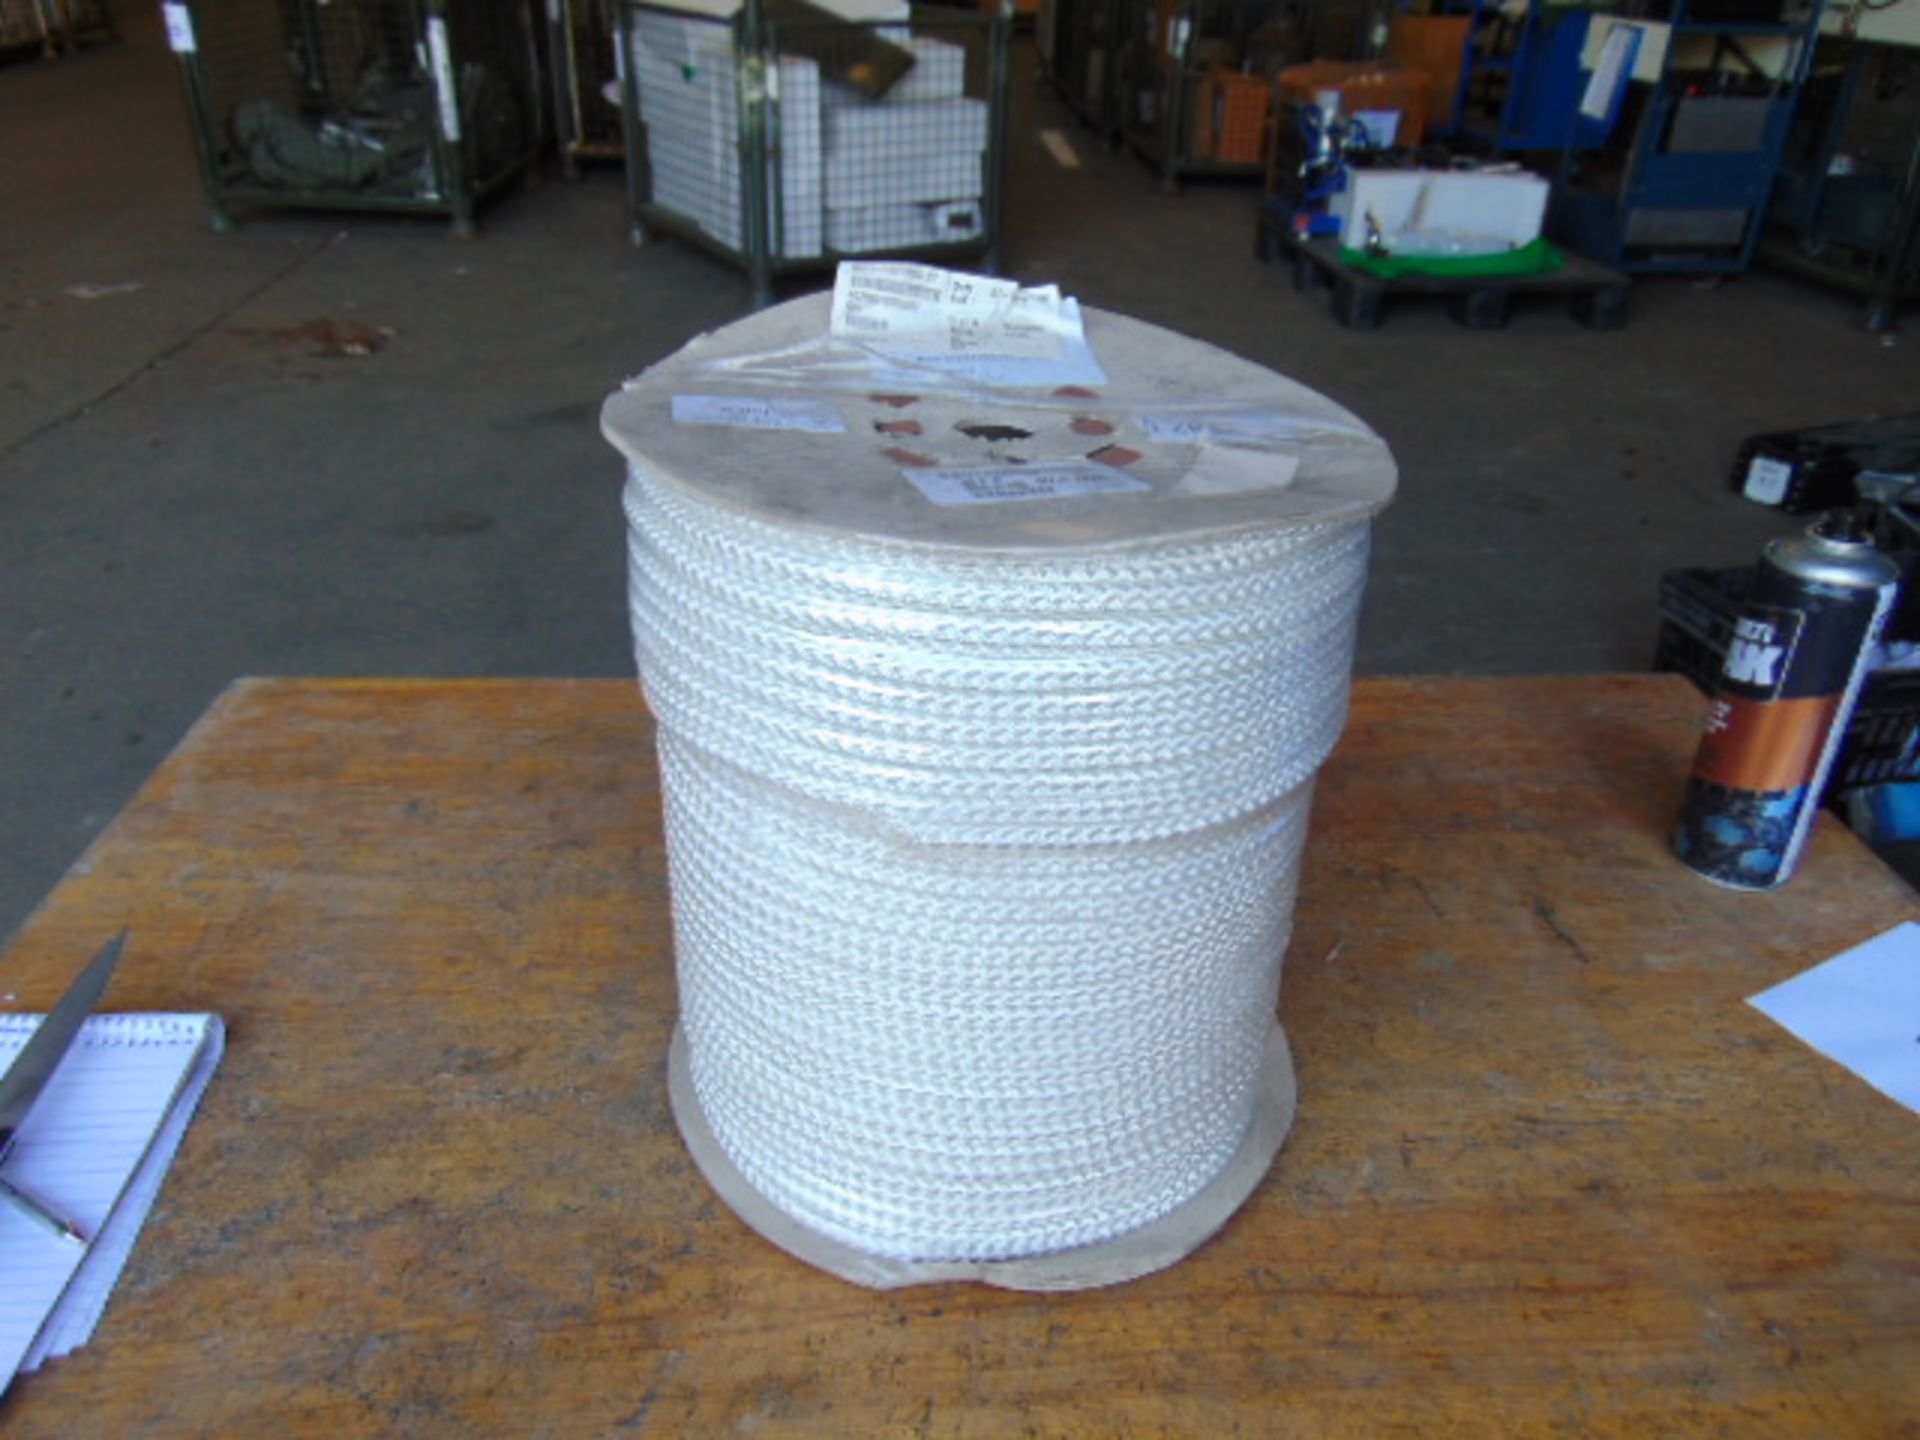 New Unissued 1 x 12kg (220m) Marine Quality Rope on Drum - Image 6 of 7